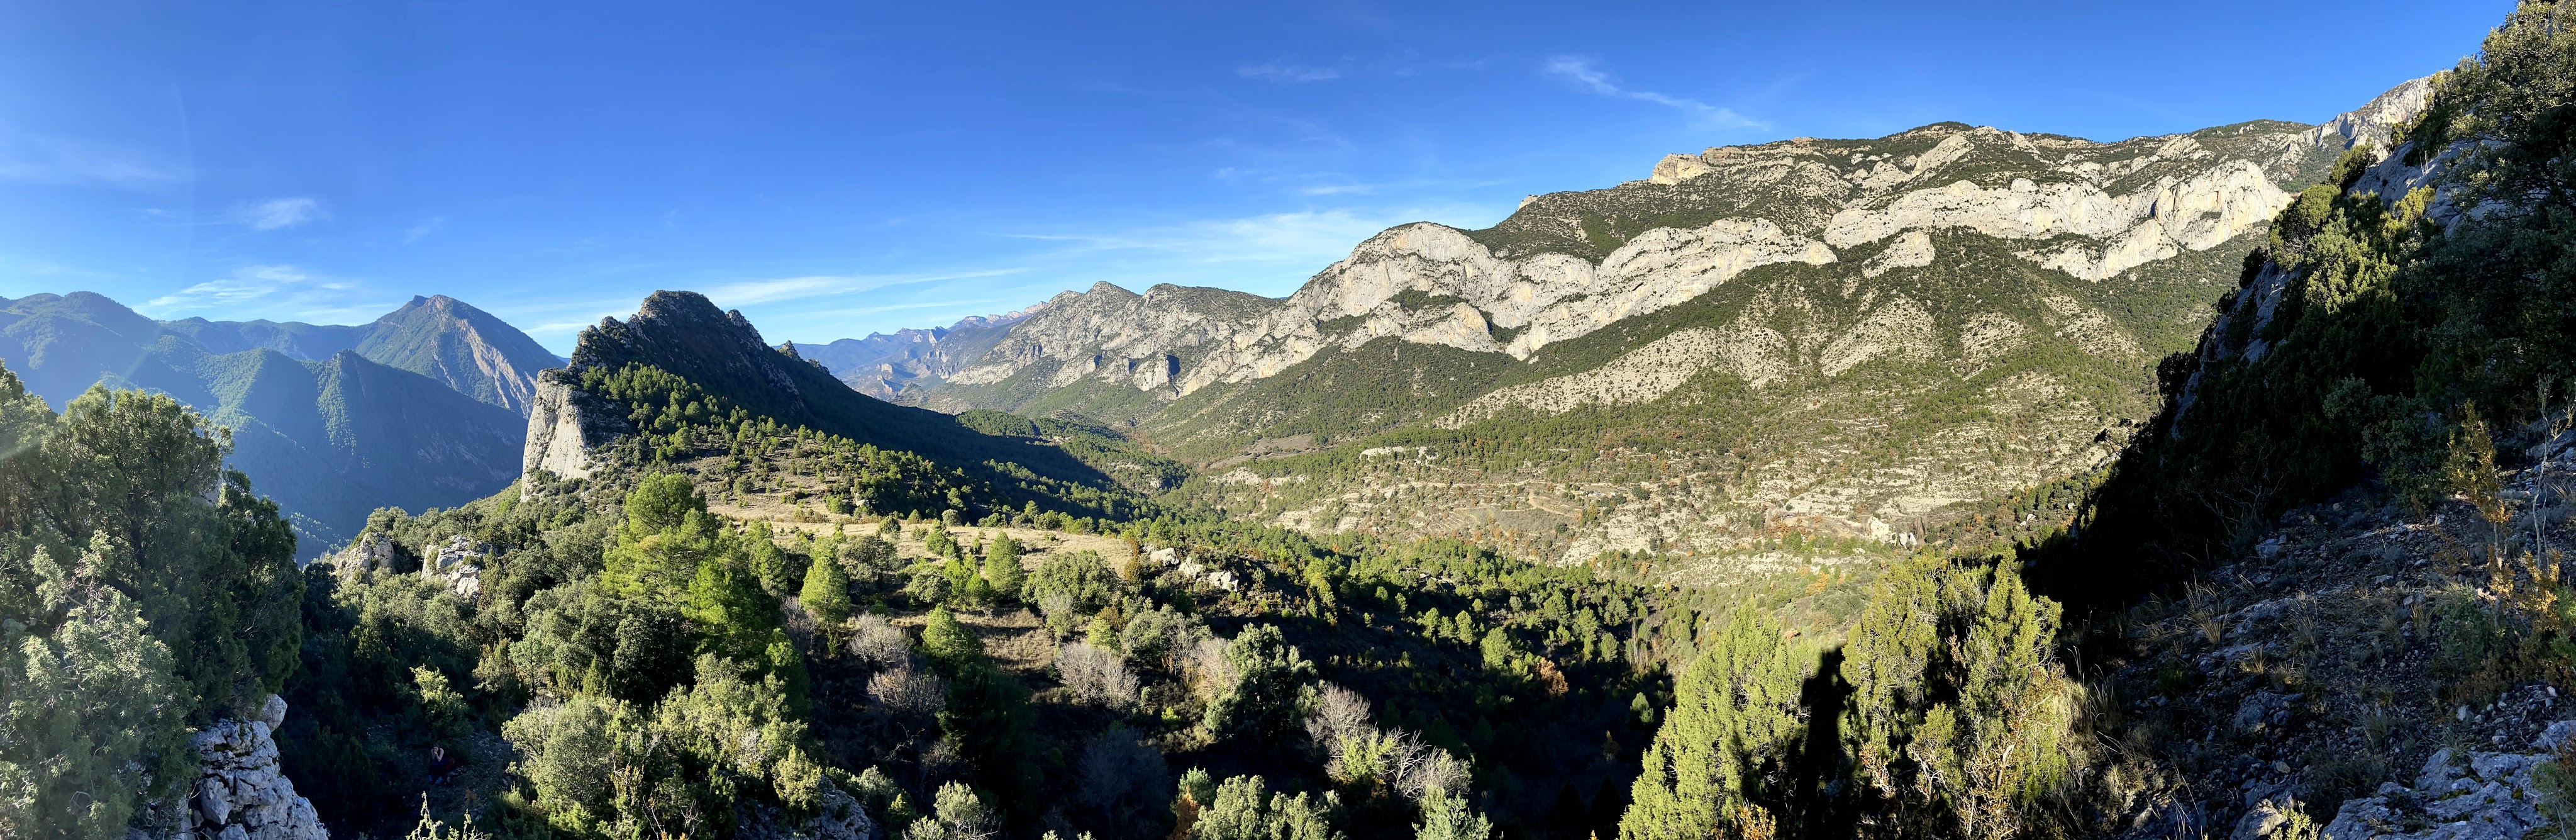 Views of Alt Urgell pre-pyreen mountains with bands of limestone in the background and lush green forests. 